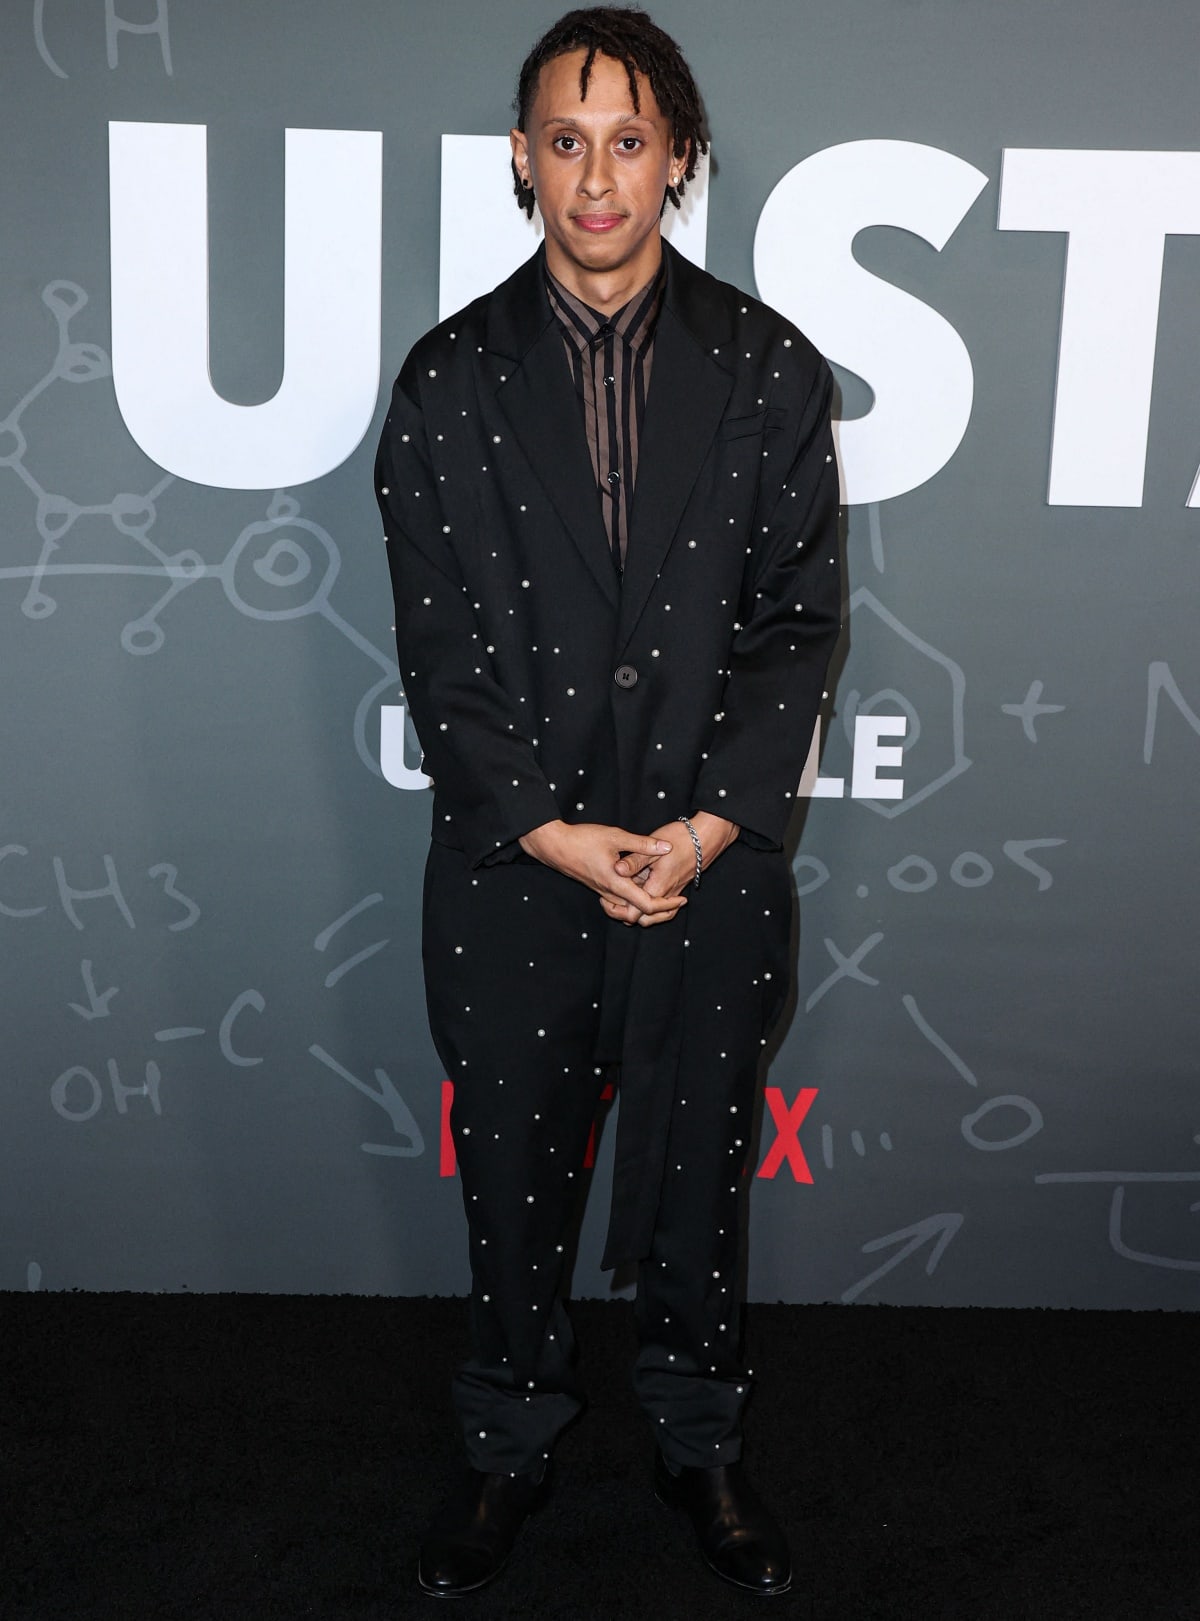 Aaron Branch at the Los Angeles premiere of Unstable